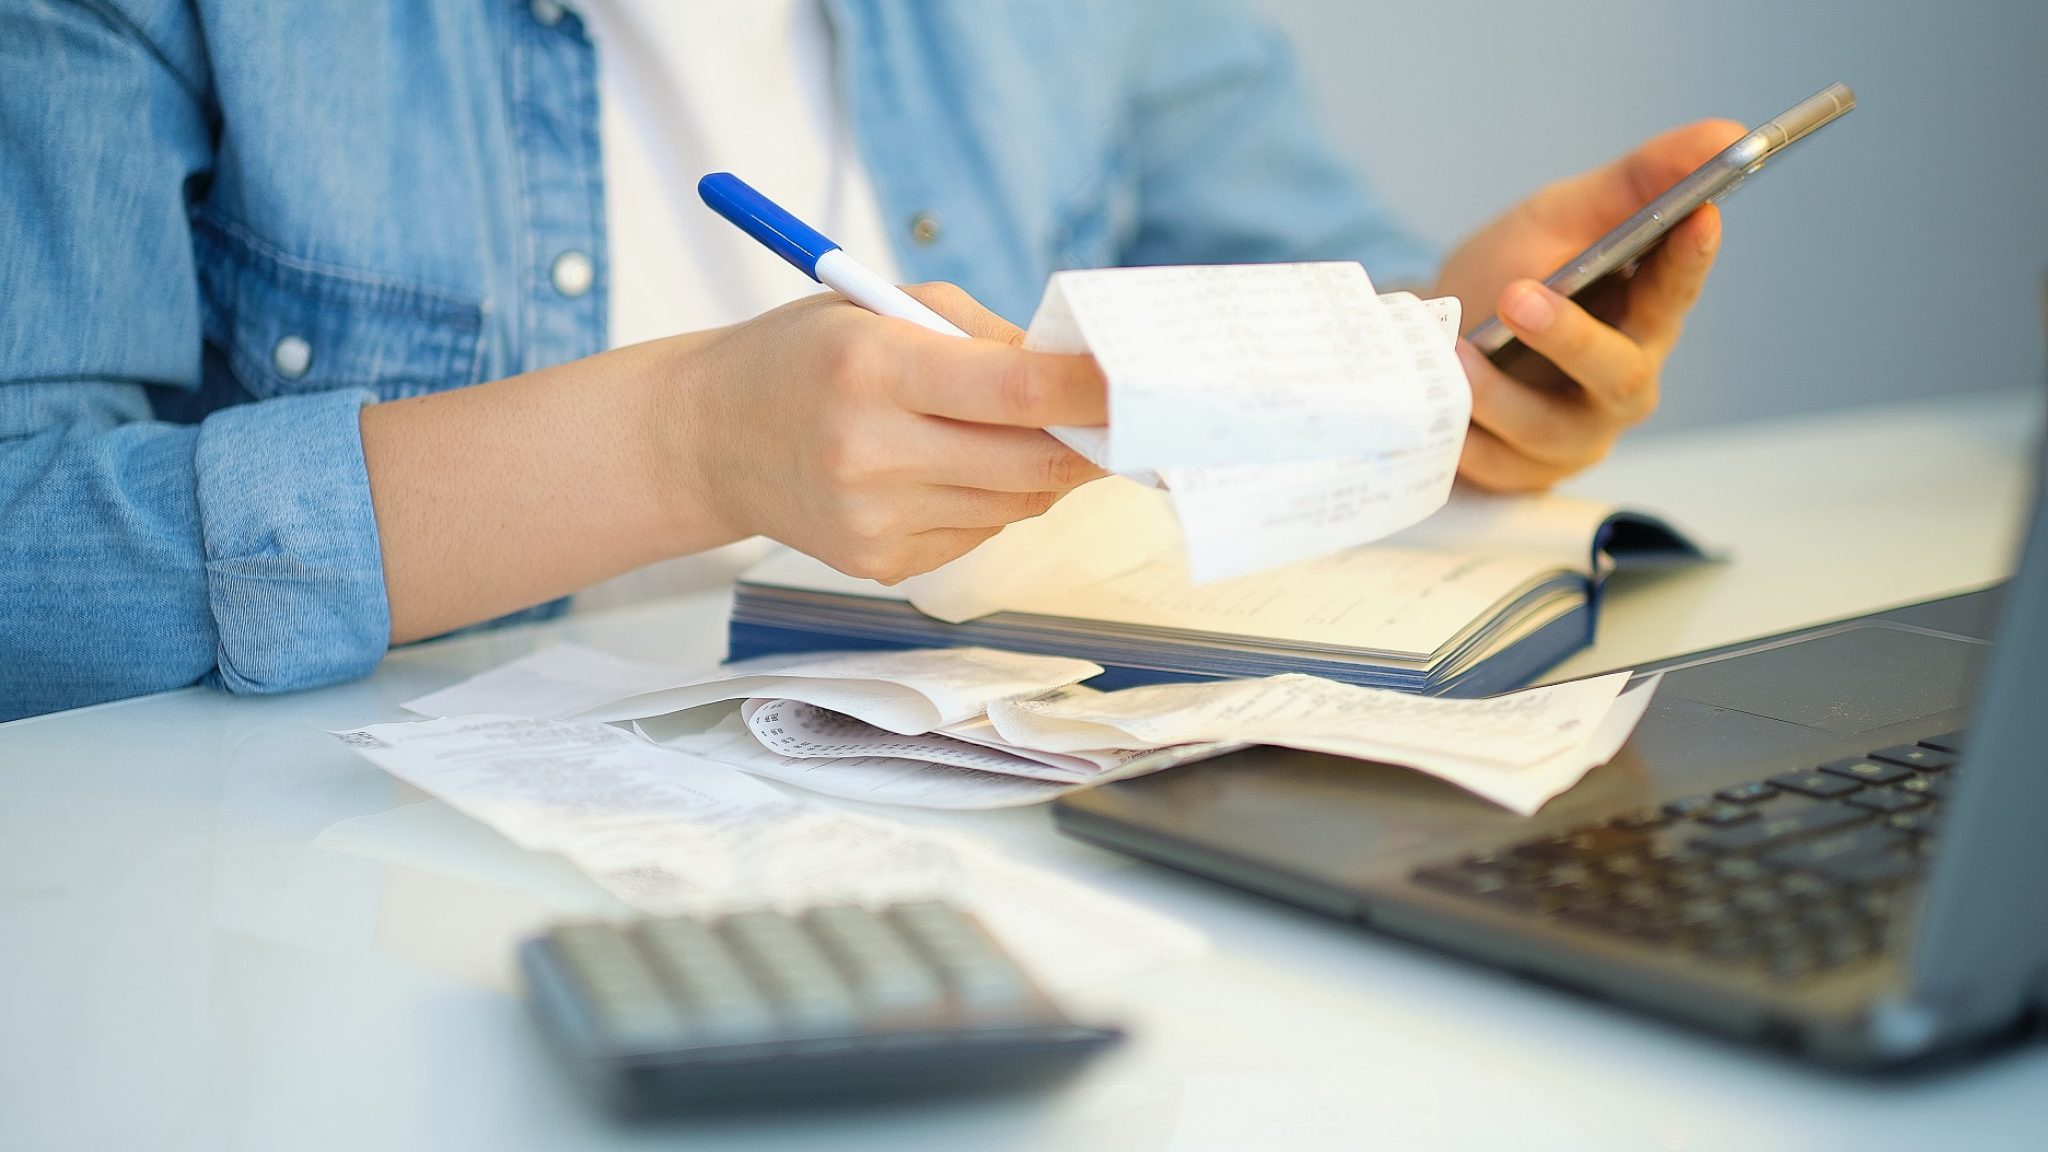 A person sits at a desk with a laptop, looking through receipts.